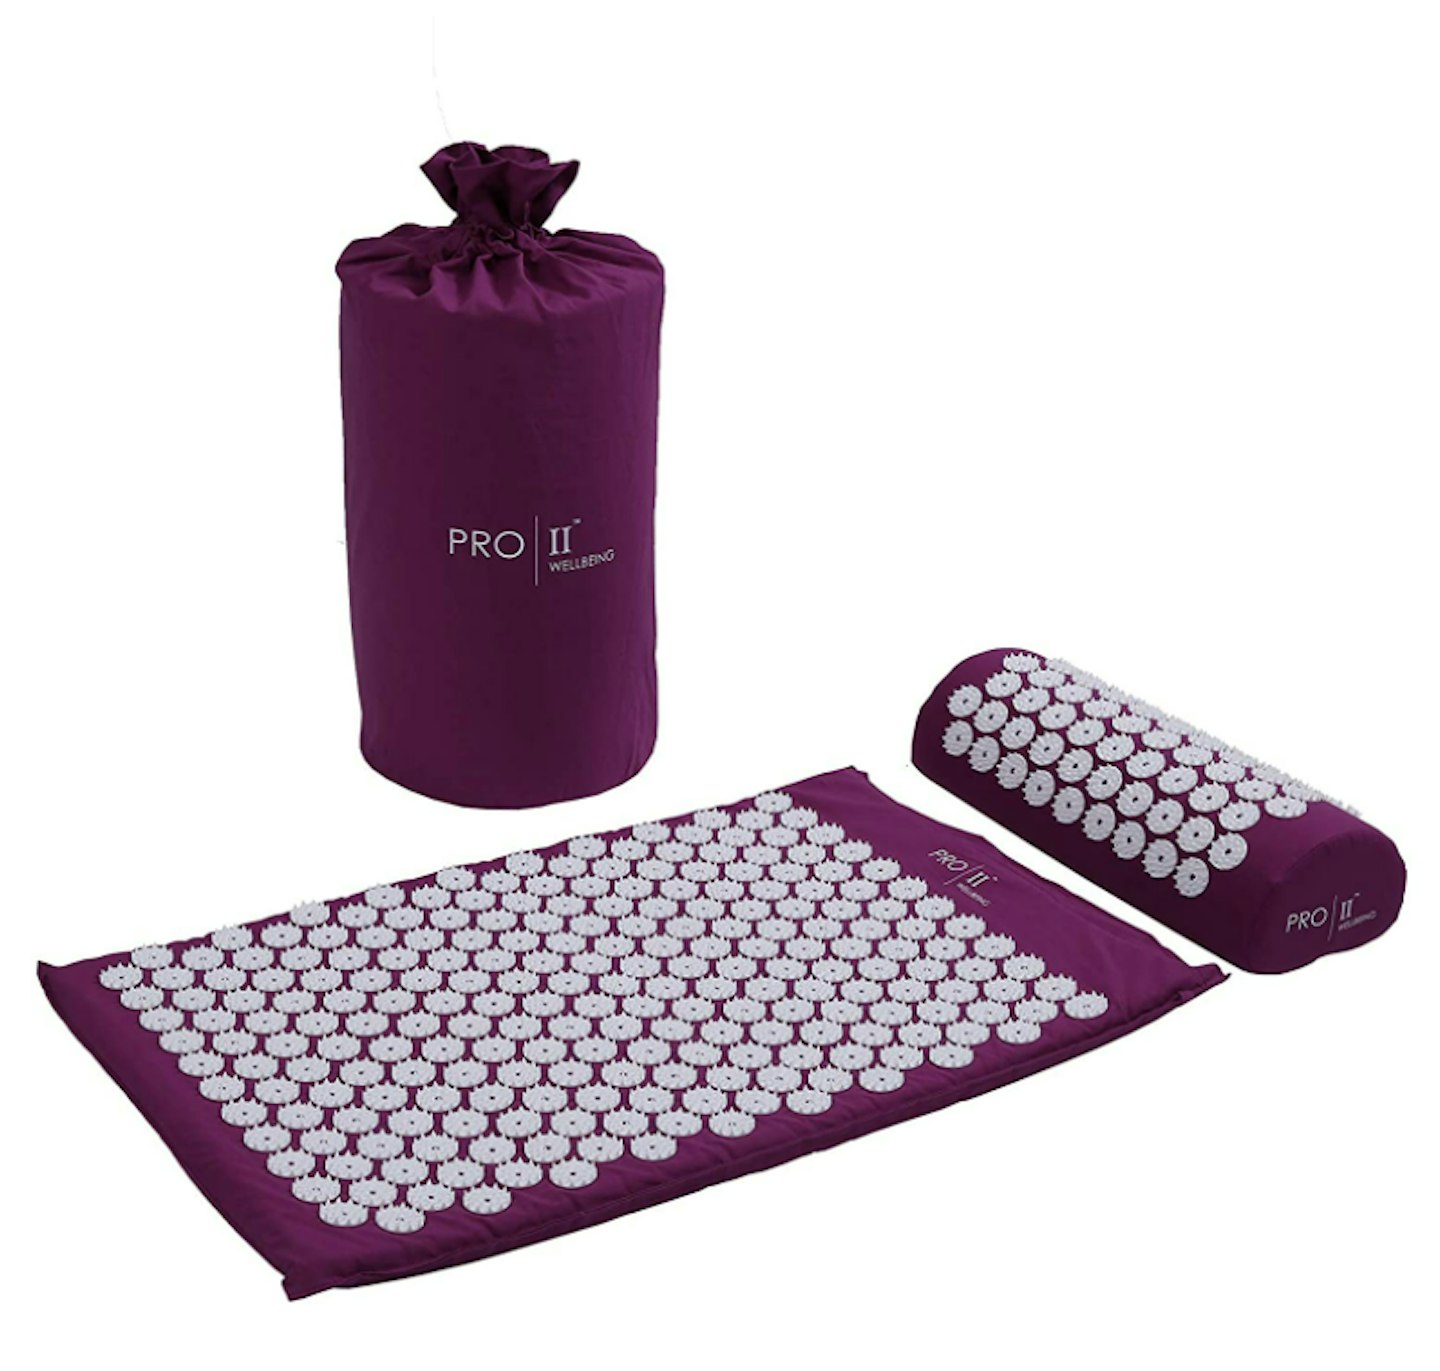 PRO 11 WELLBEING Acupressure Mat and Pillow Set